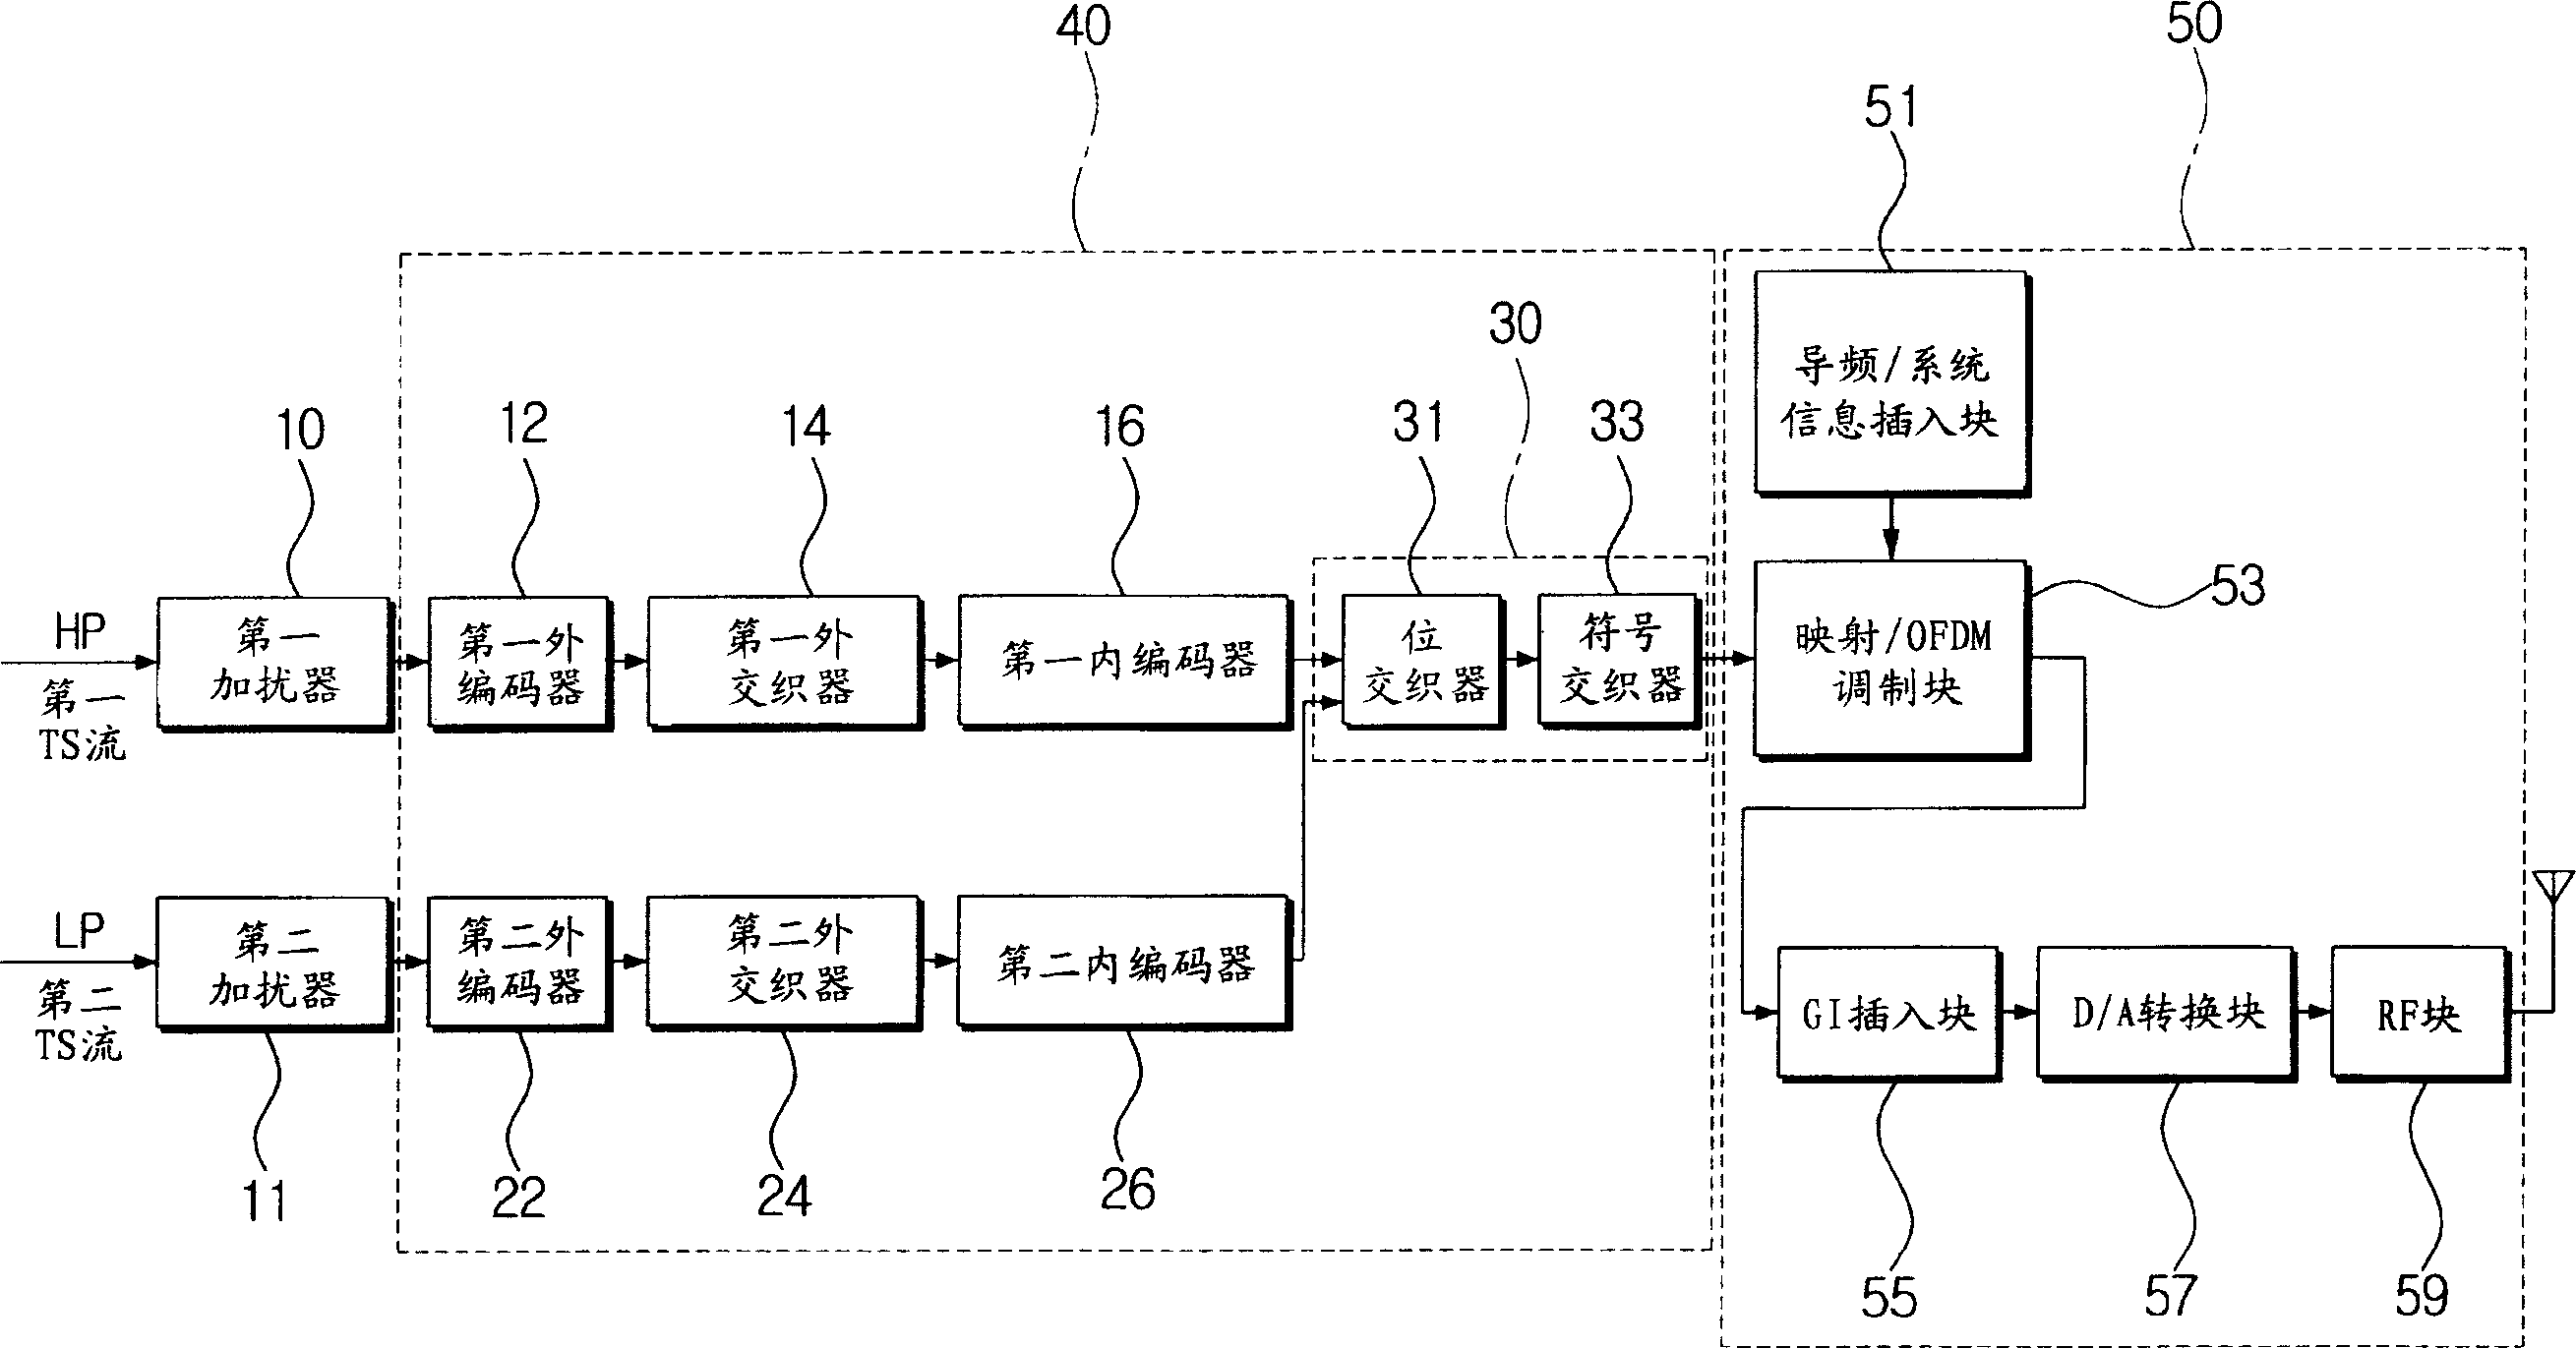 Transmitting device and method of digital broadcasting system with improved internal rondam mechanism